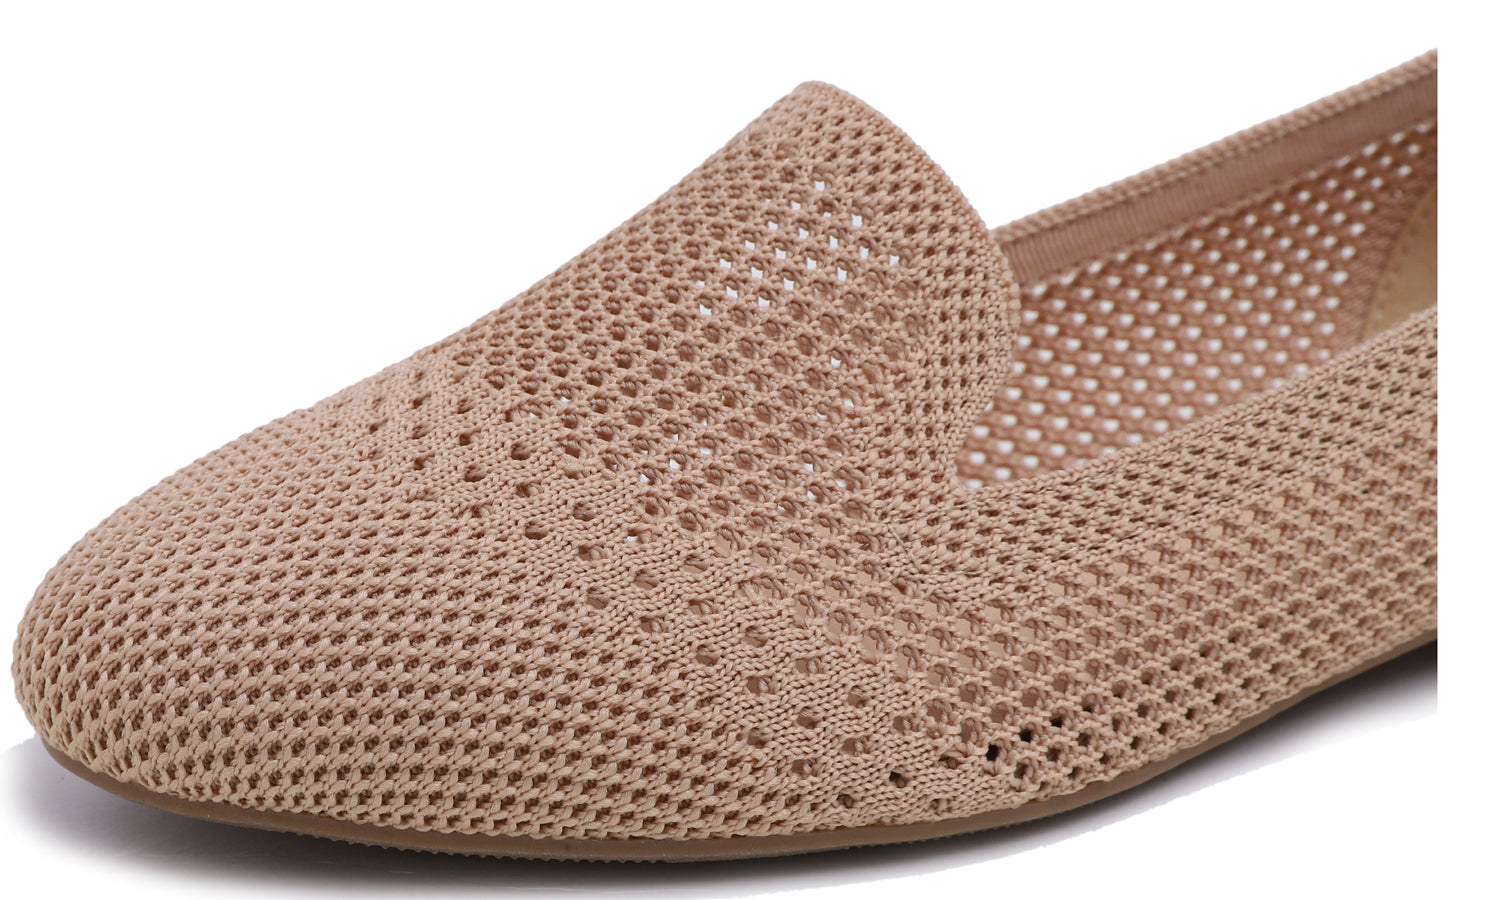 Feversole Women's Woven Fashion Breathable Knit Flat Shoes Nude Color Loafer